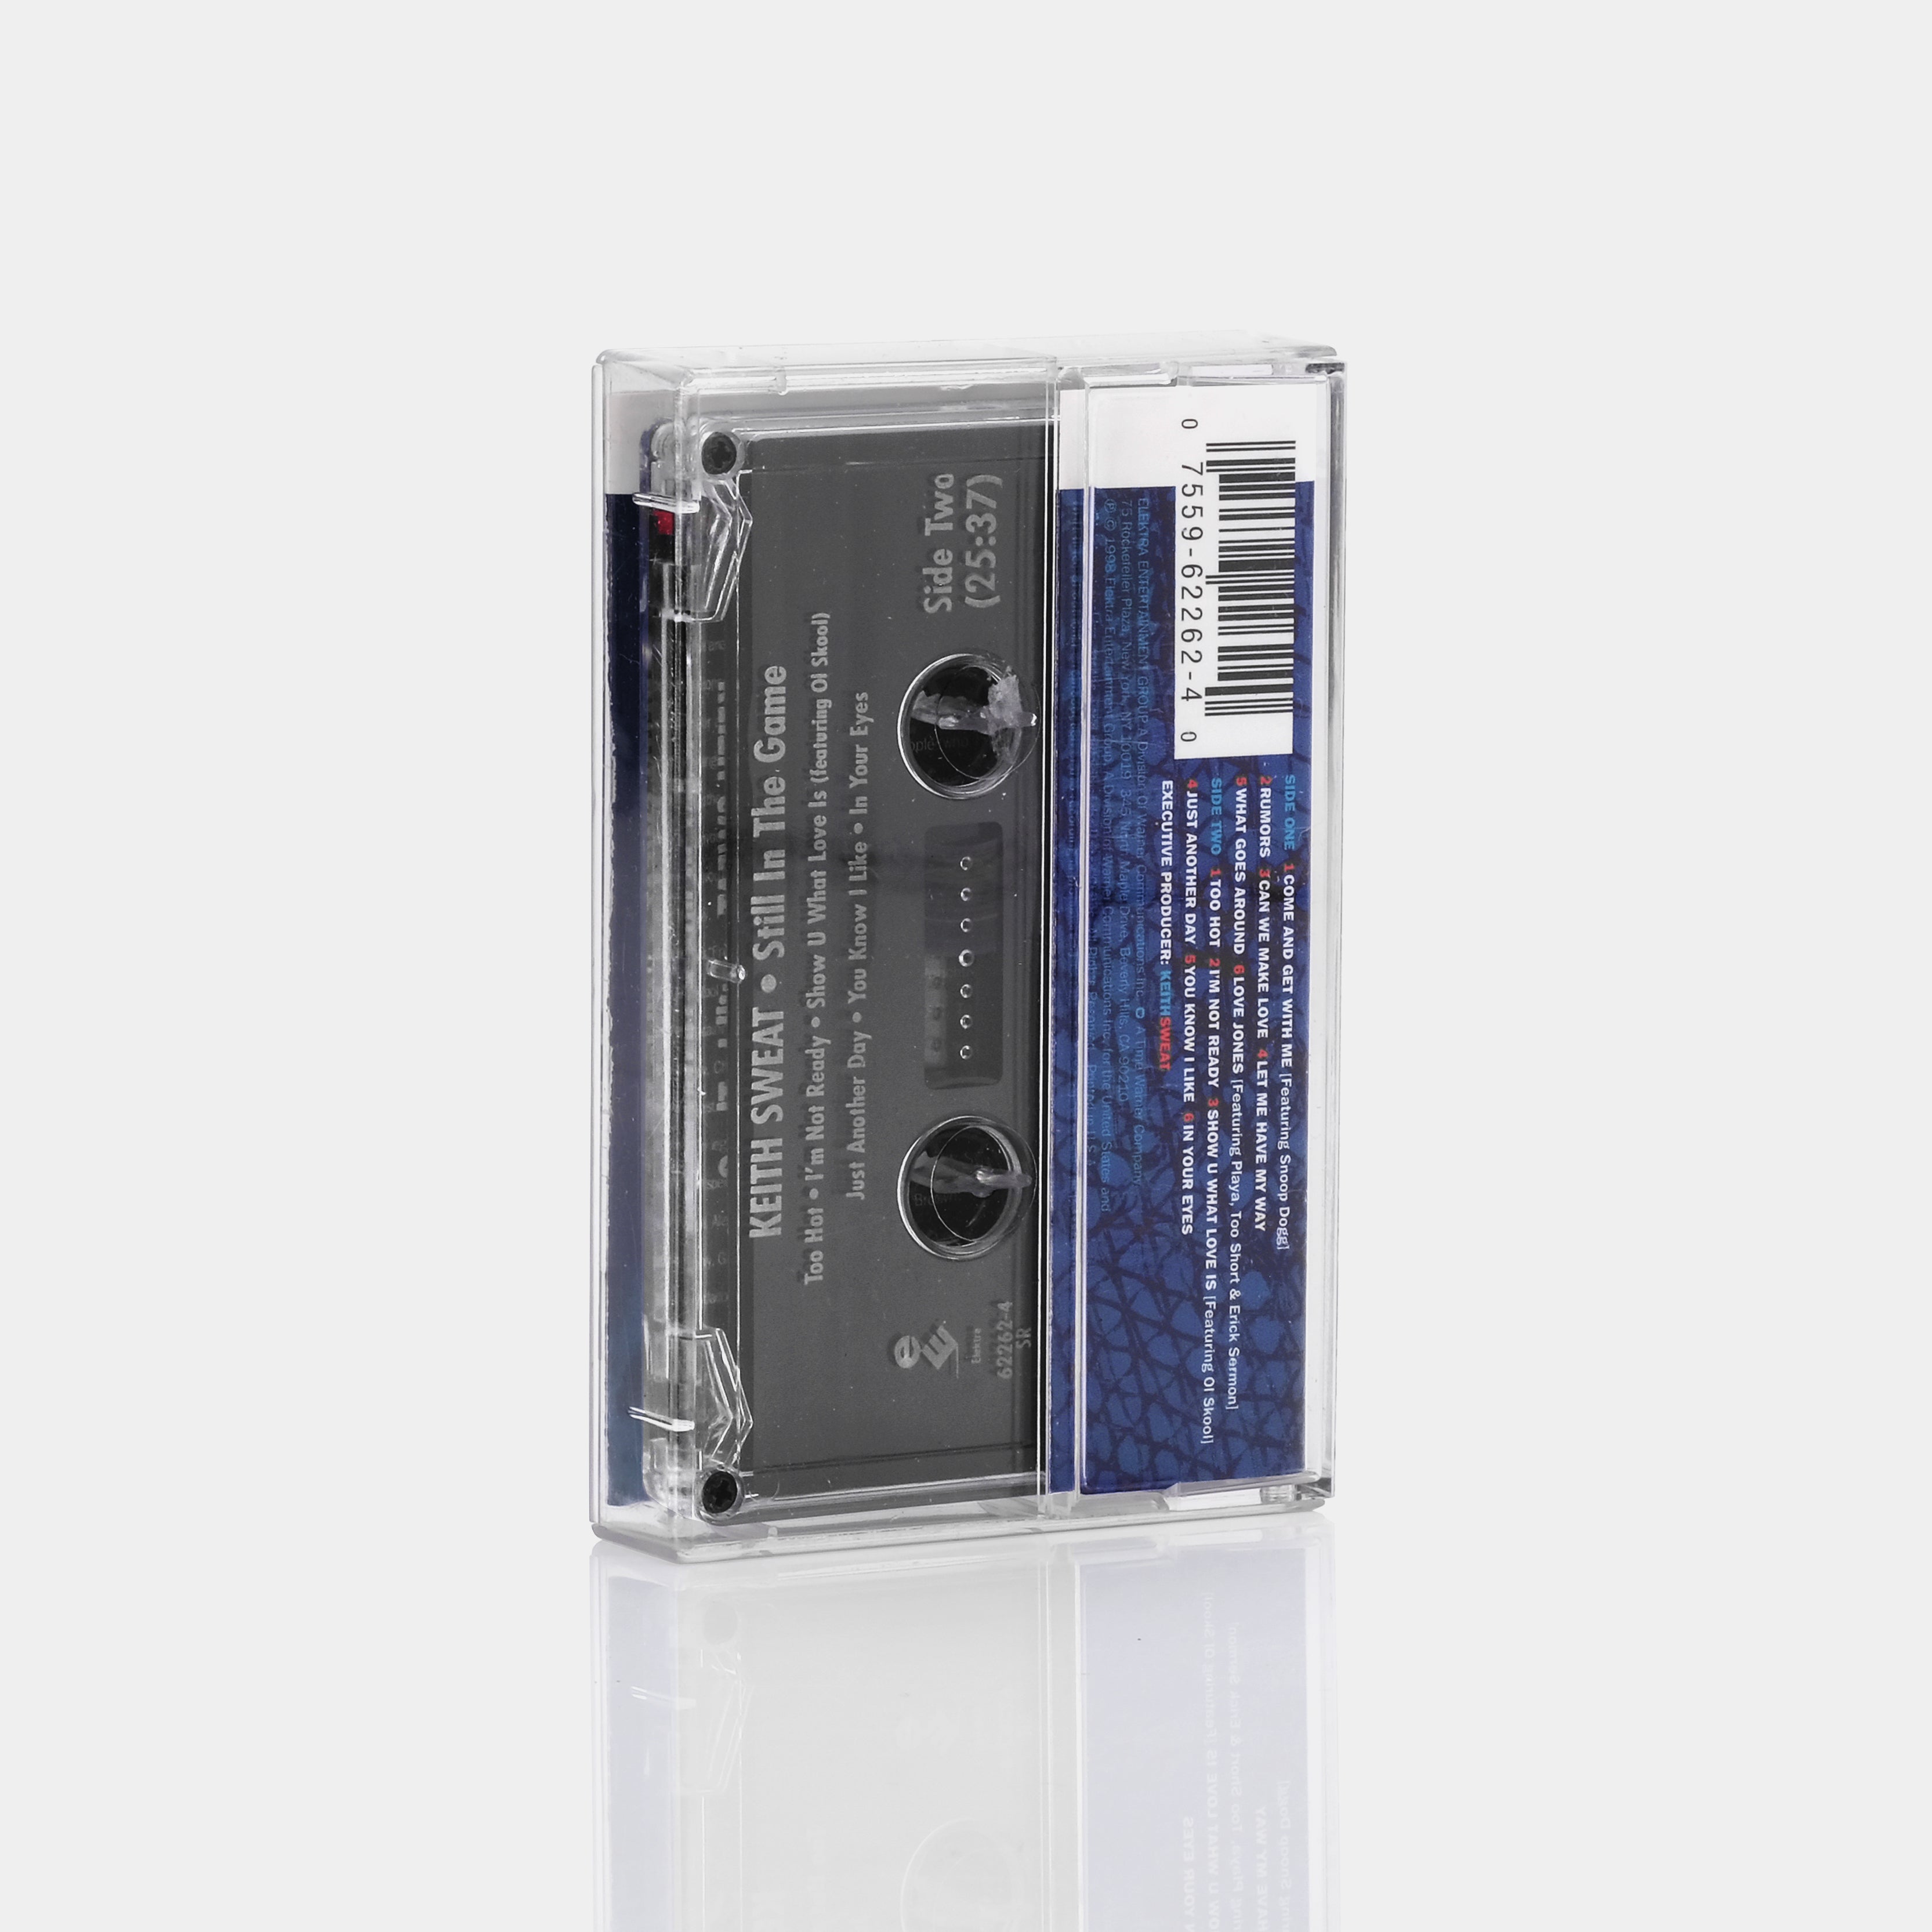 Keith Sweat - Still In The Game Cassette Tape